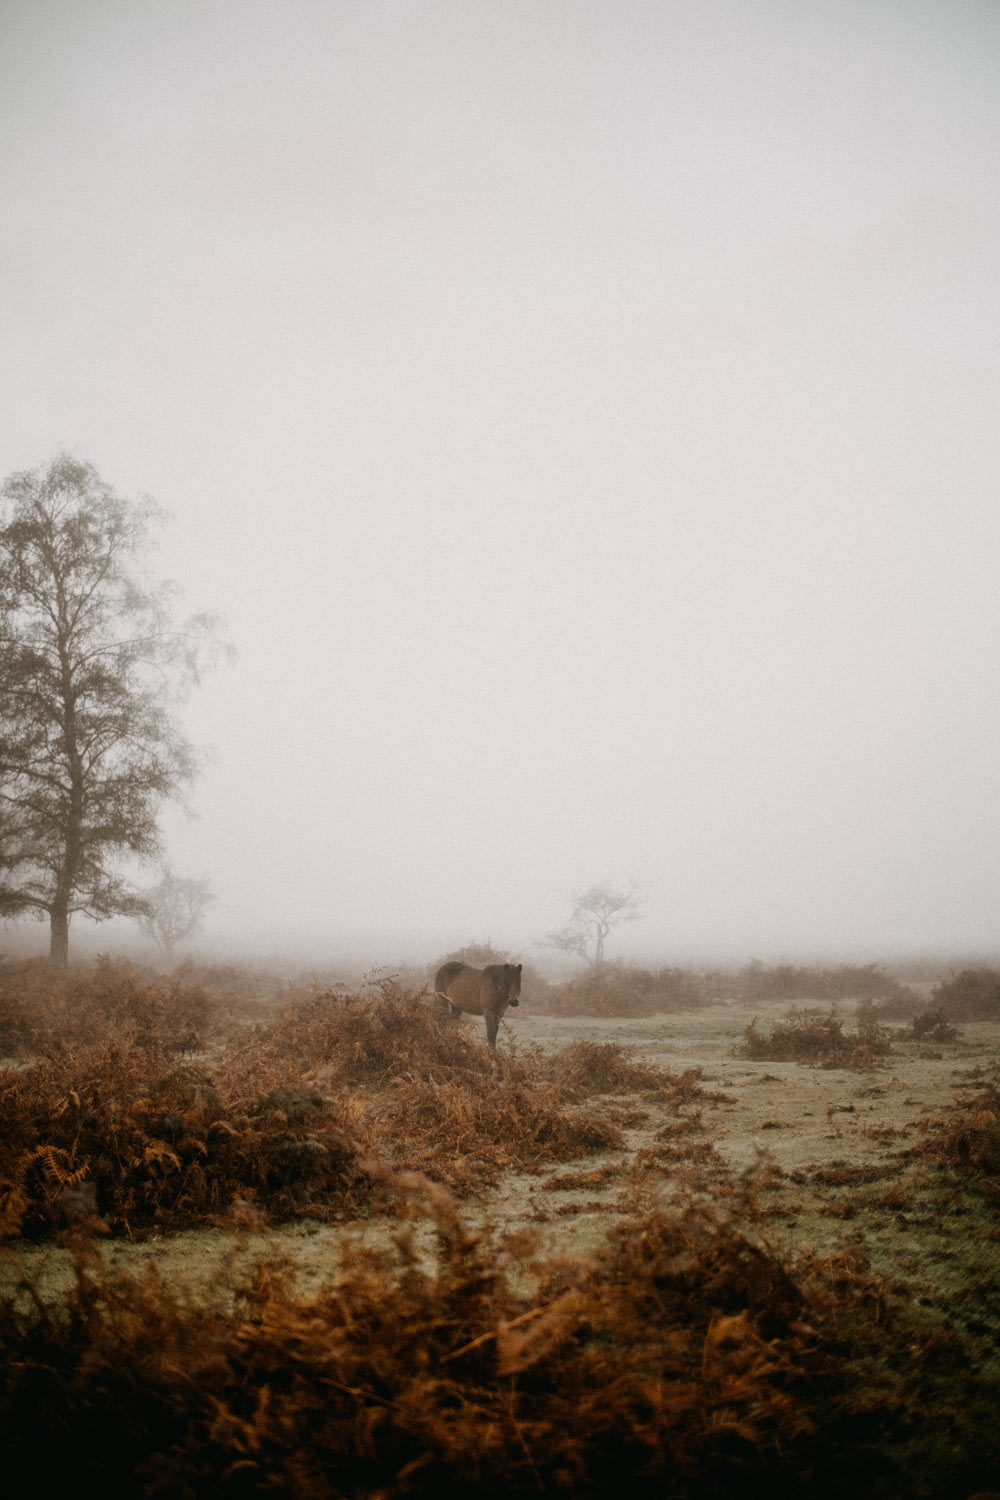 a cow standing in the middle of a foggy field